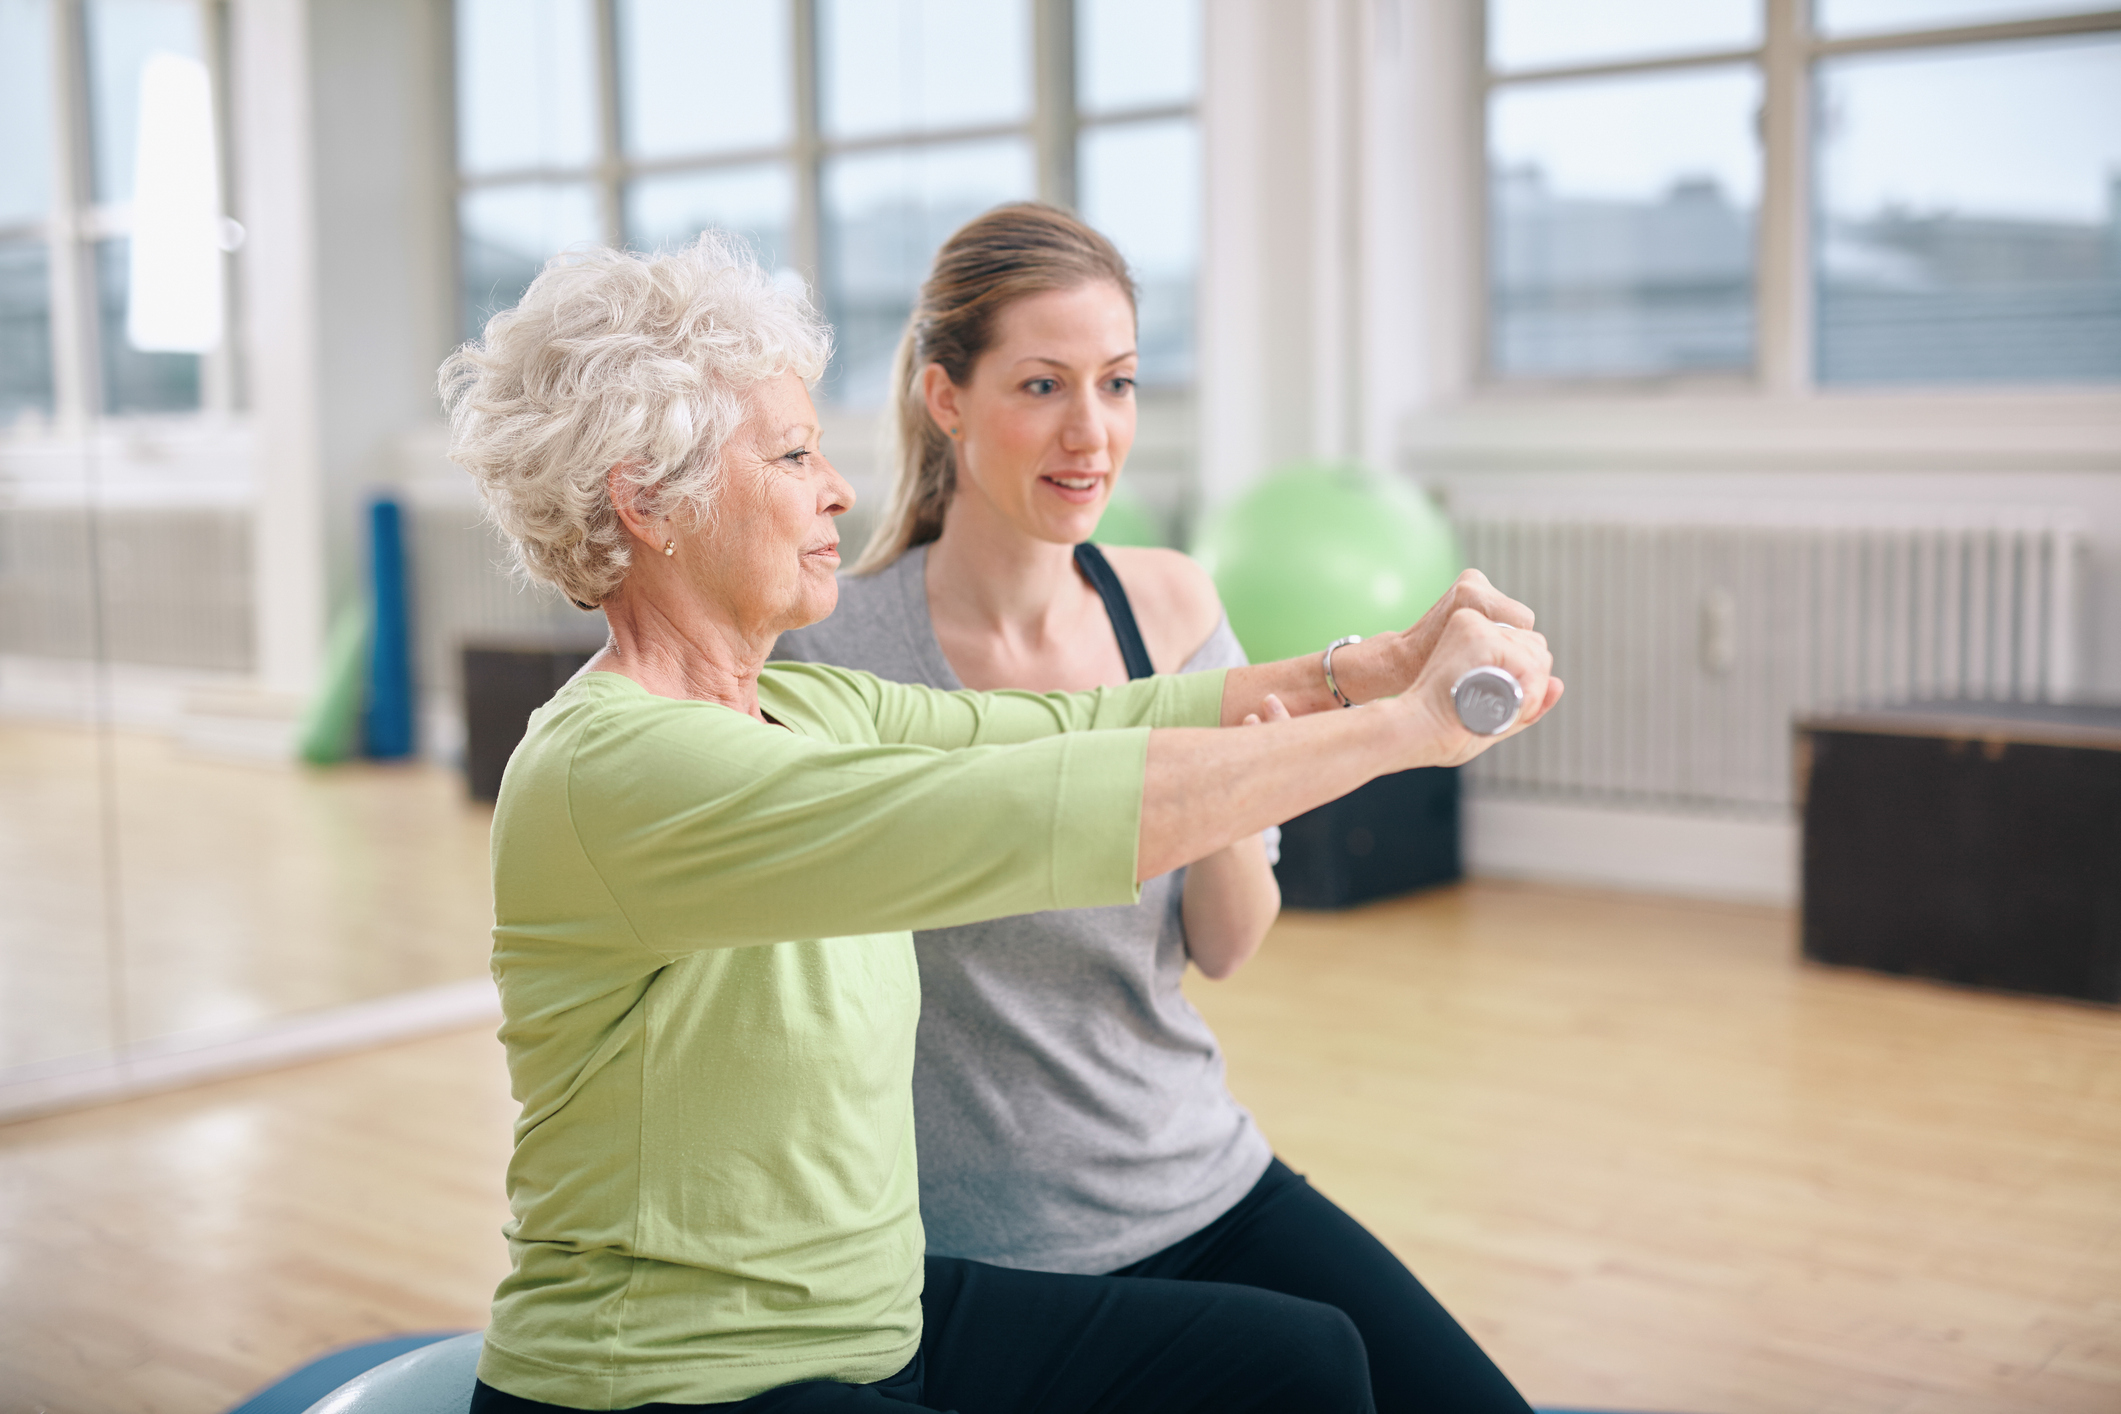 Healthy Exercise Habits for People with Diabetes